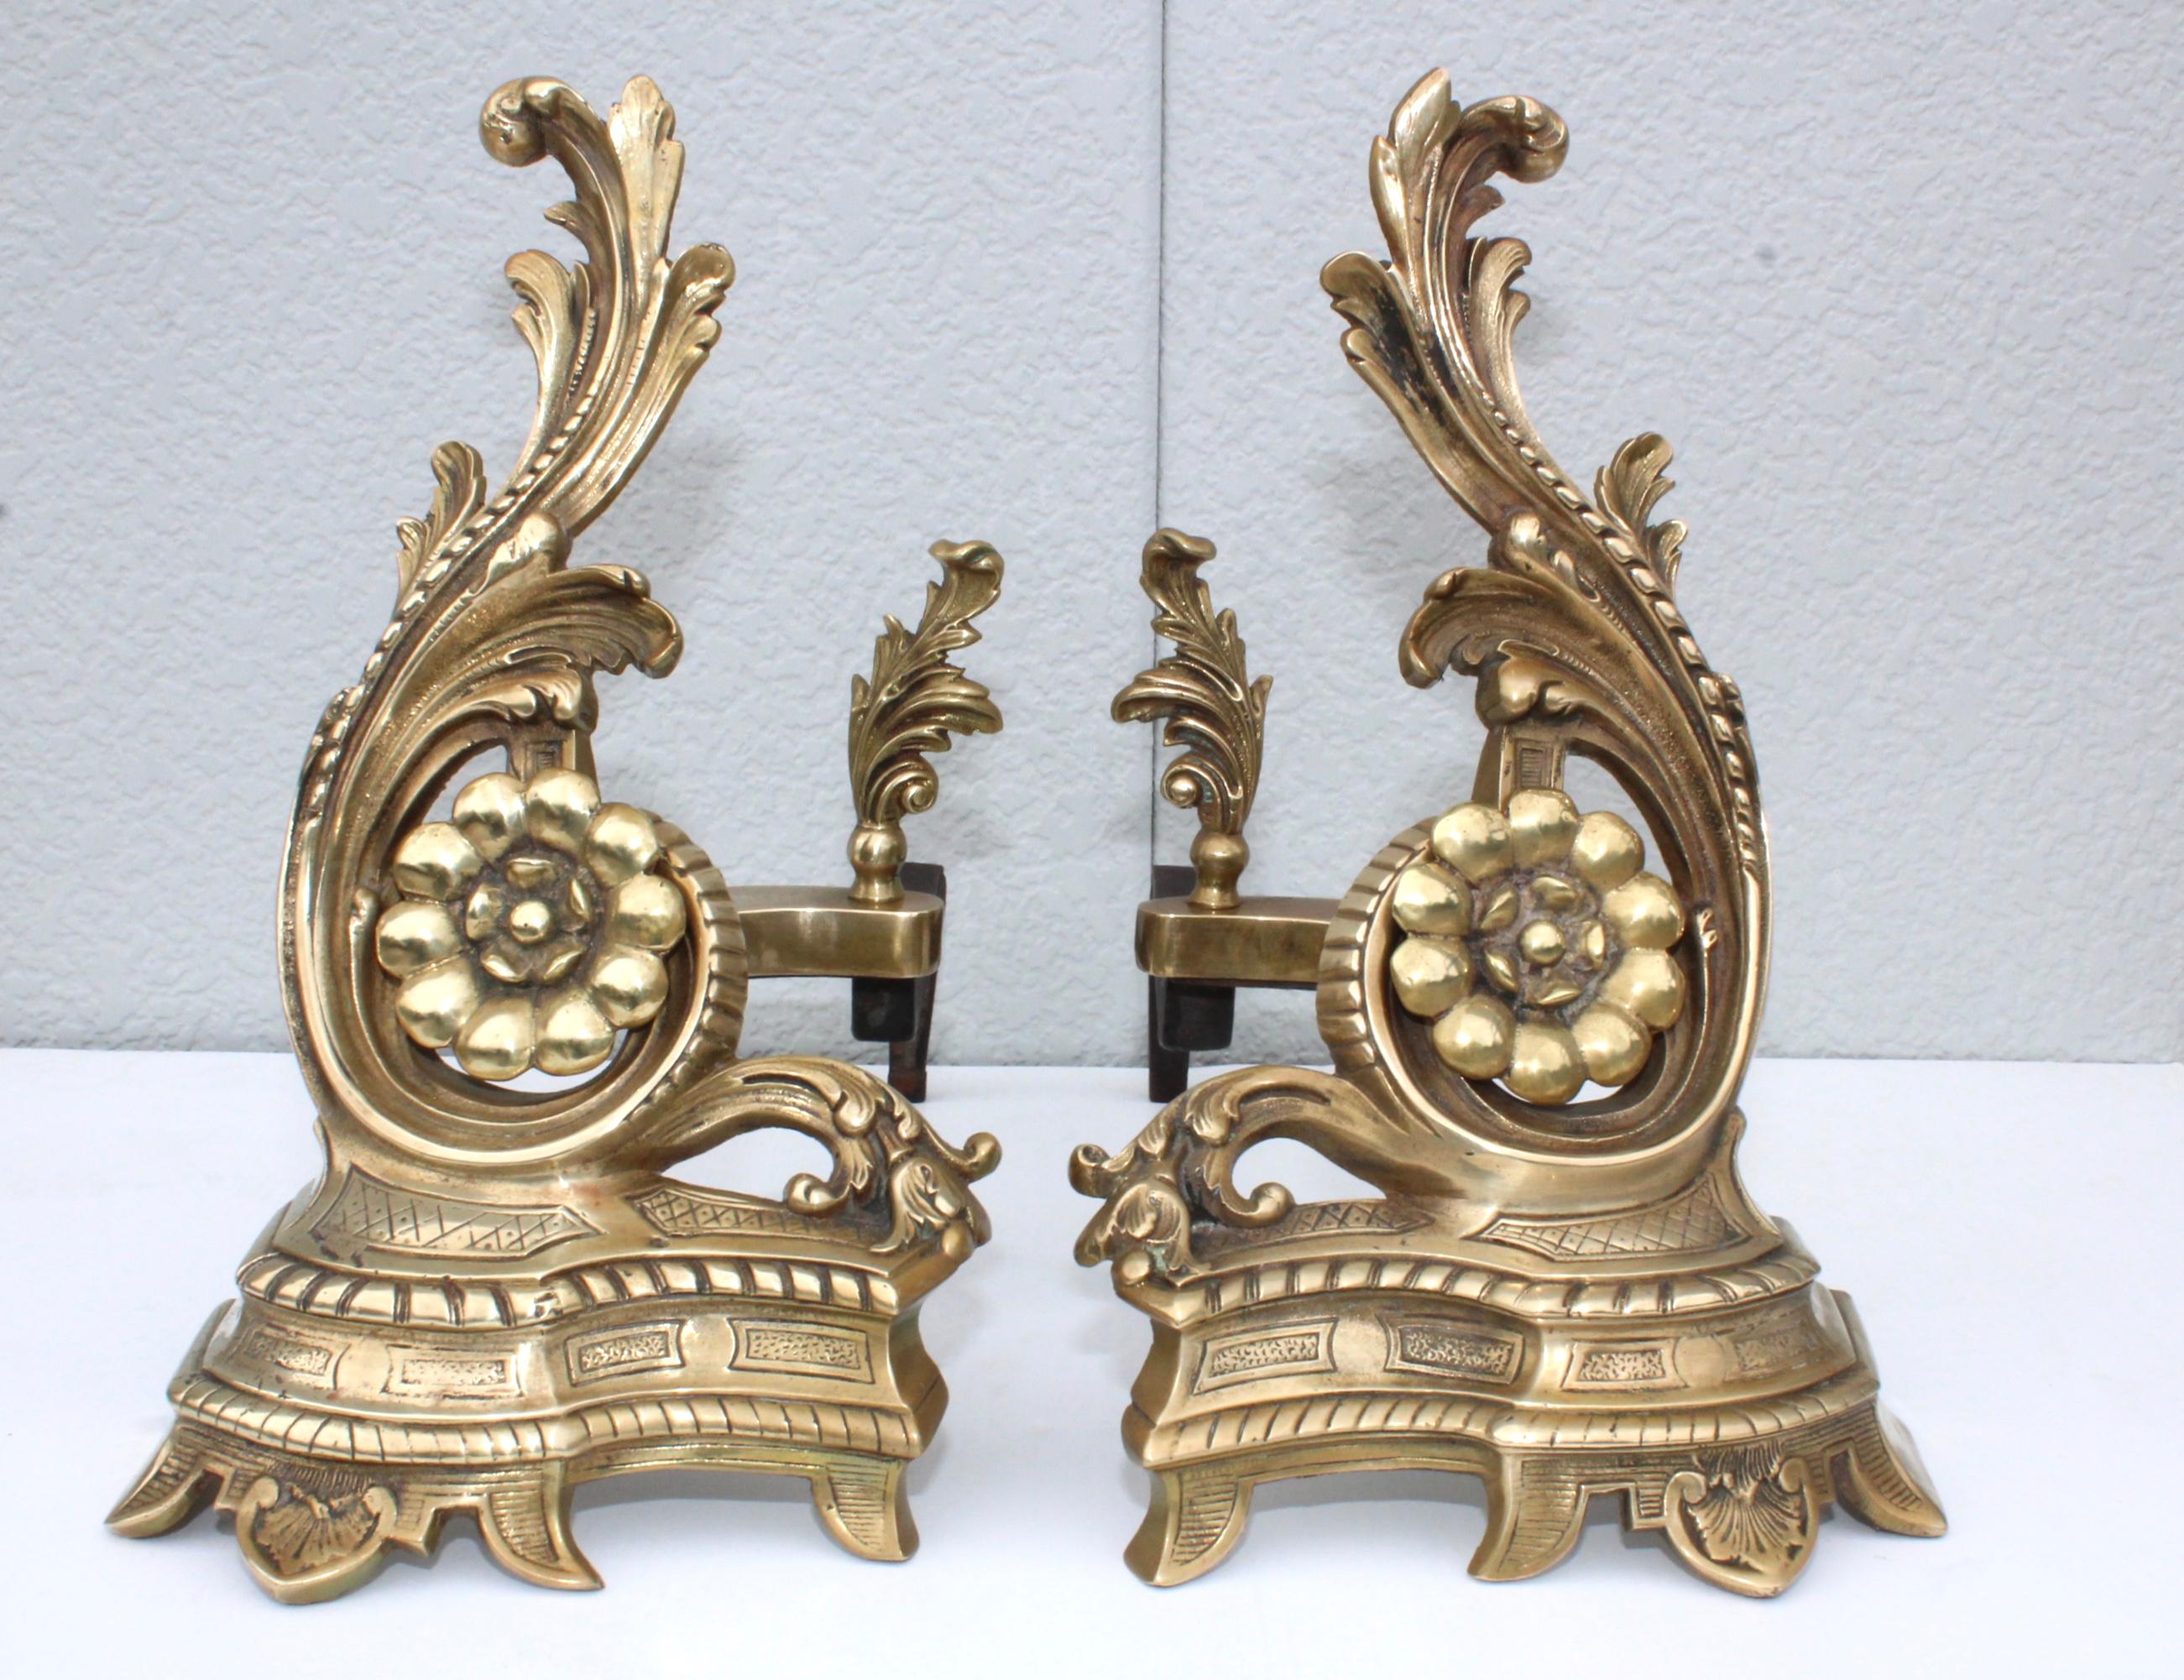 Stunning pair of 1950s solid brass French andirons.